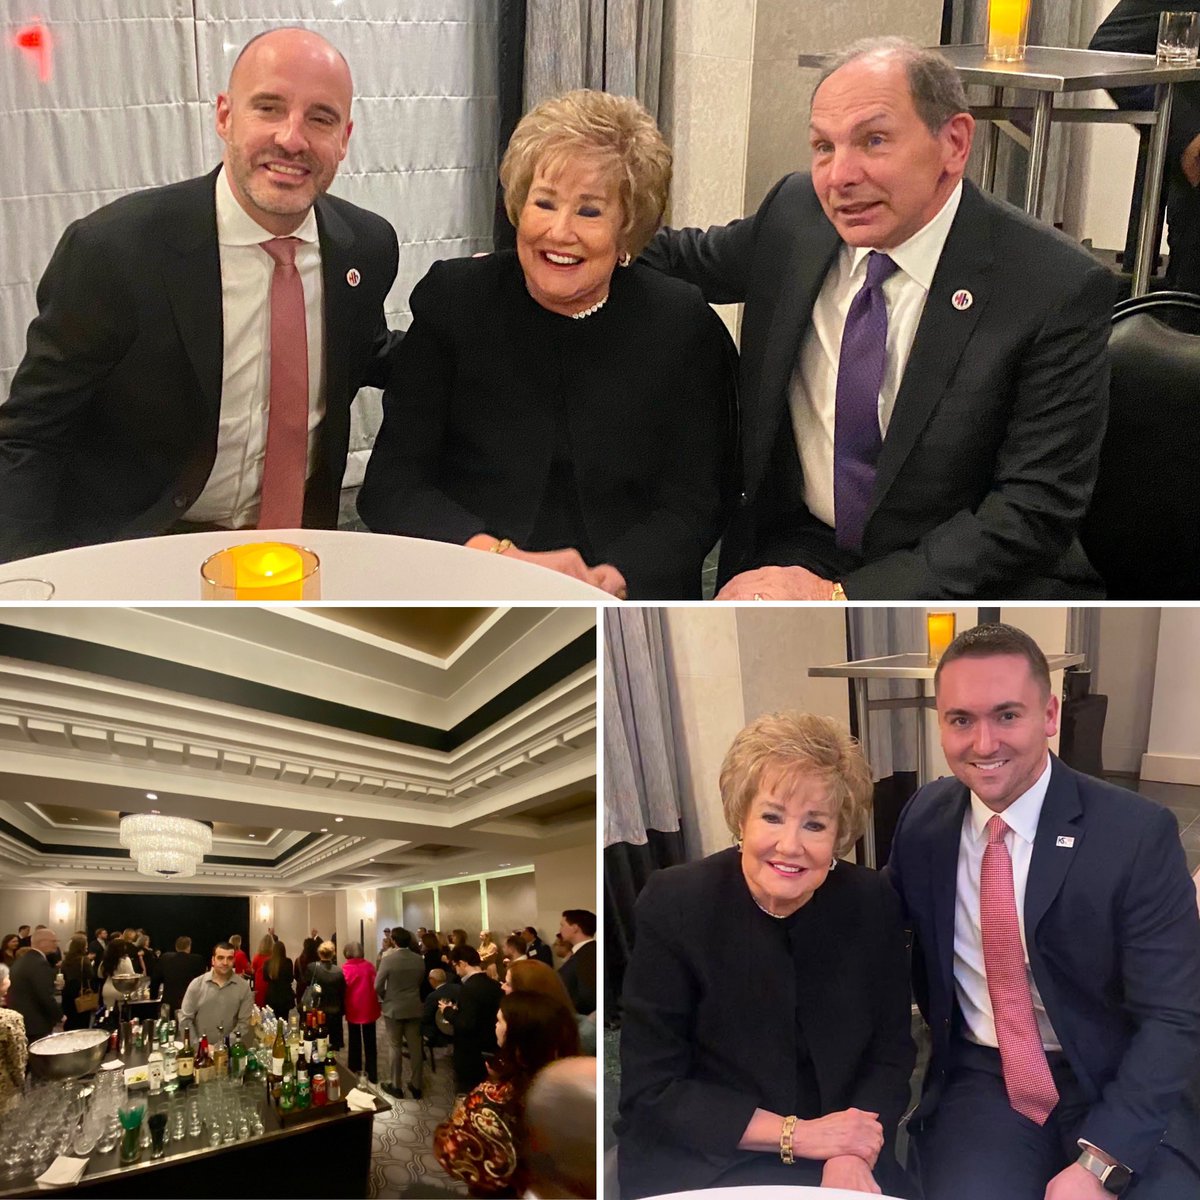 Privileged to meet the new Chairman of the @DoleFoundation’s Board former @DeptVetAffairs Secretary Bob McDonald & EDF’s founder, Senator Dole last night.

@k9sforwarriors is a proud partner of EDF & looking forward to another year of measurable impact for nation’s hidden heroes!